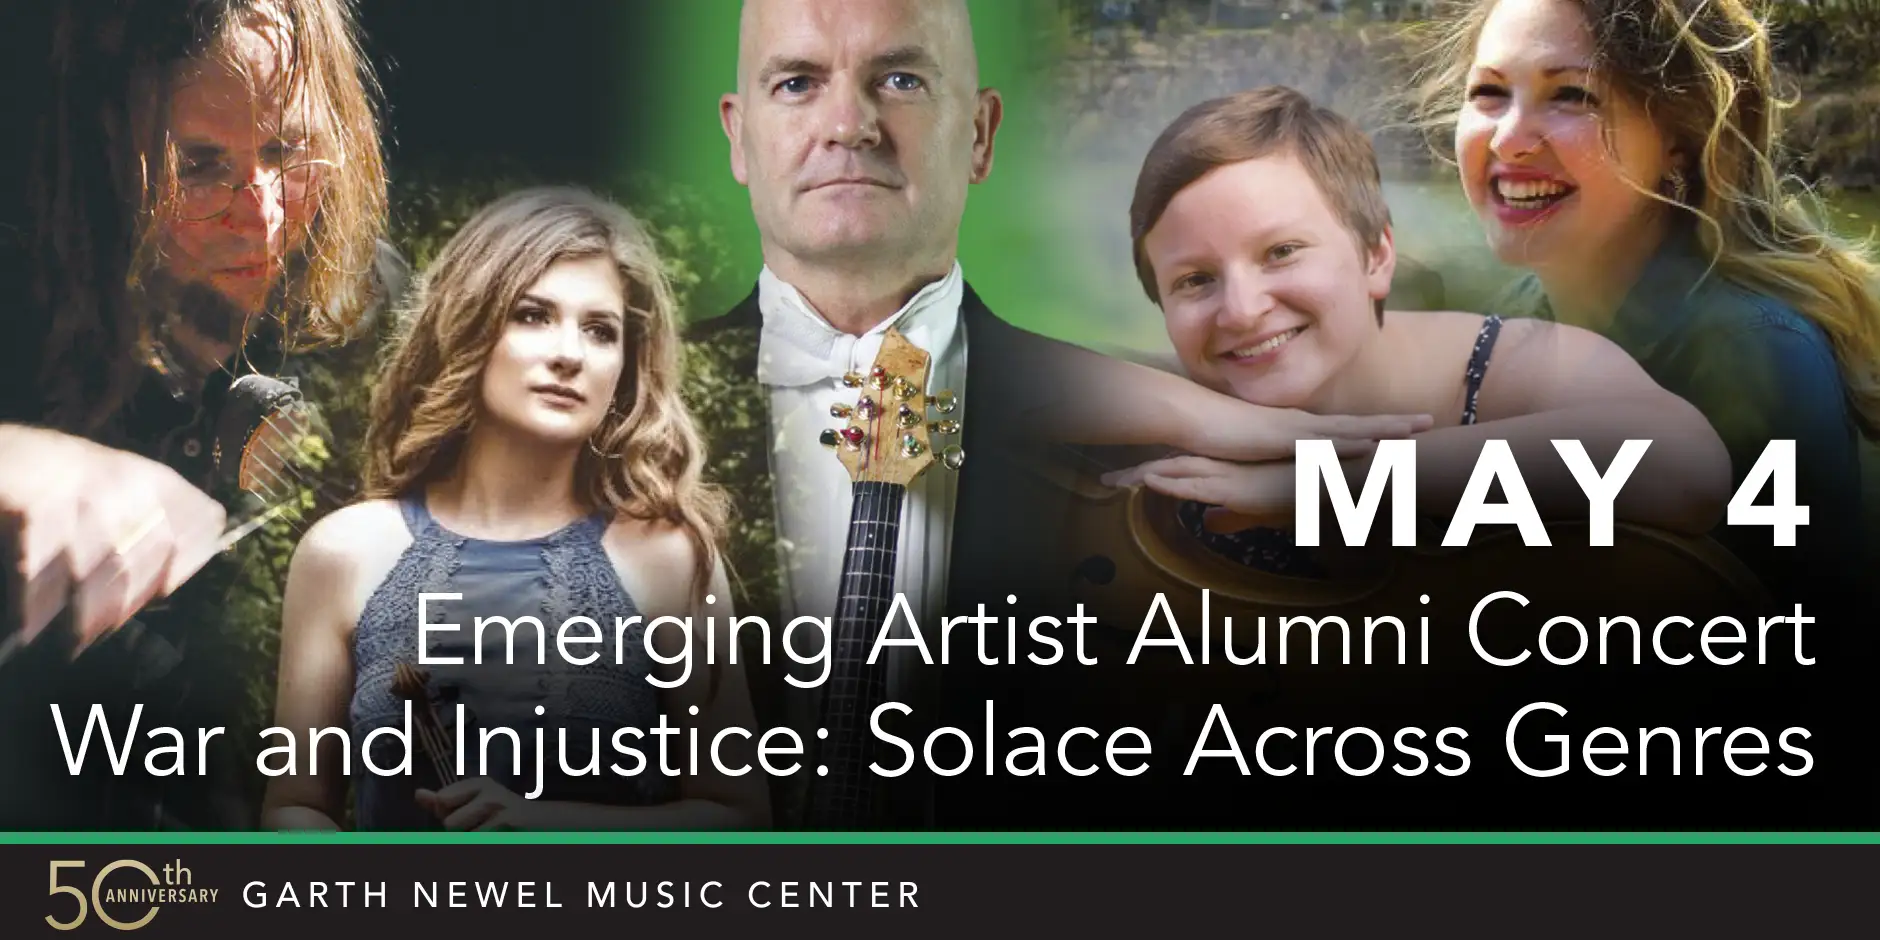 May 4 - Emerging Artist Alumni Concert - War and Injustice: Solace Across Genres.